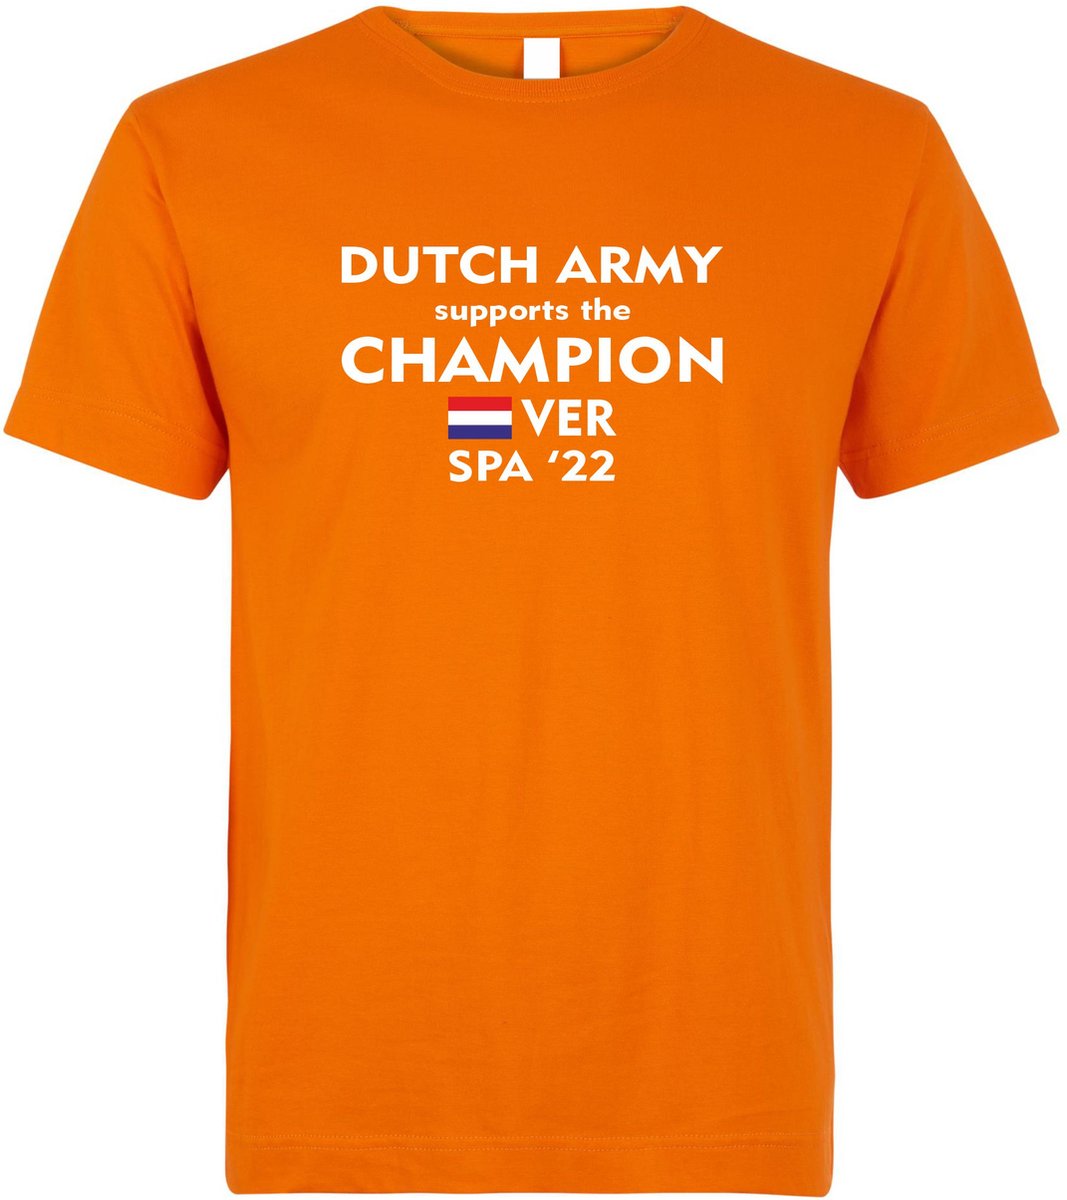 T-shirt kinderen Dutch Army supports the Champion Spa 22 | Max Verstappen / Red Bull Racing / Formule 1 fan | Grand Prix Circuit Spa-Francorchamps | kleding shirt | Oranje | maat 116